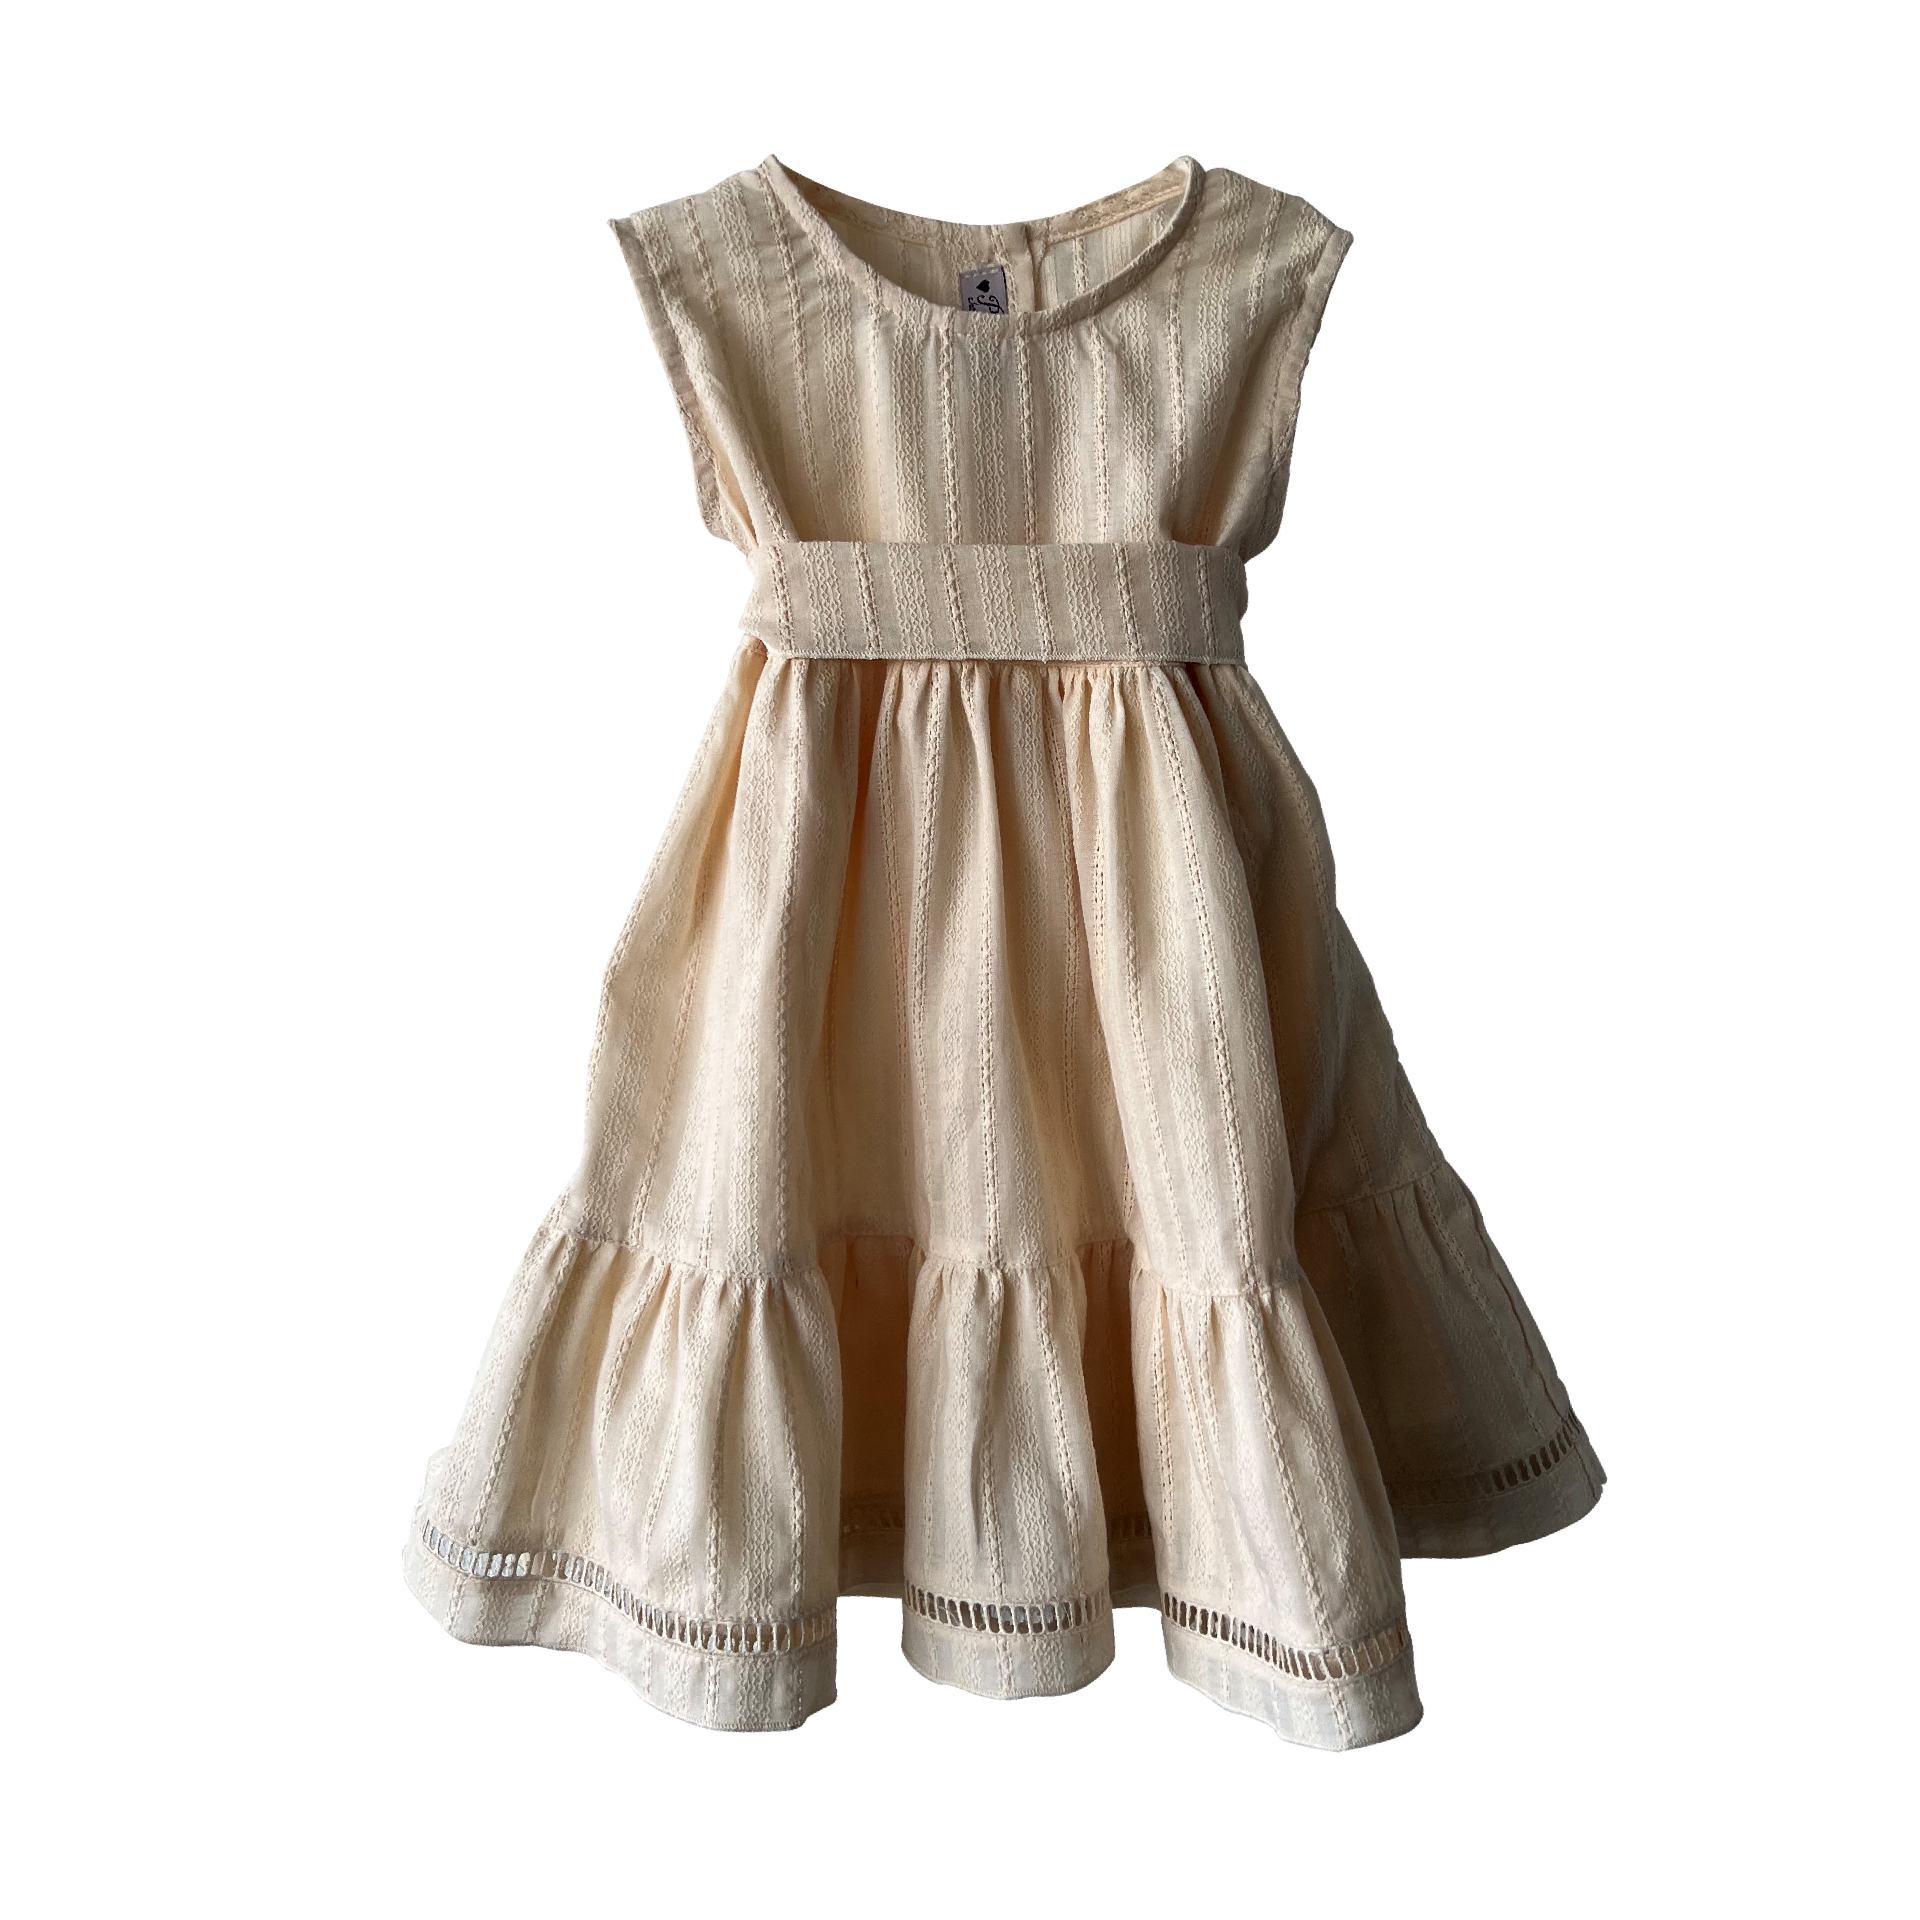 Beige embroidery dress